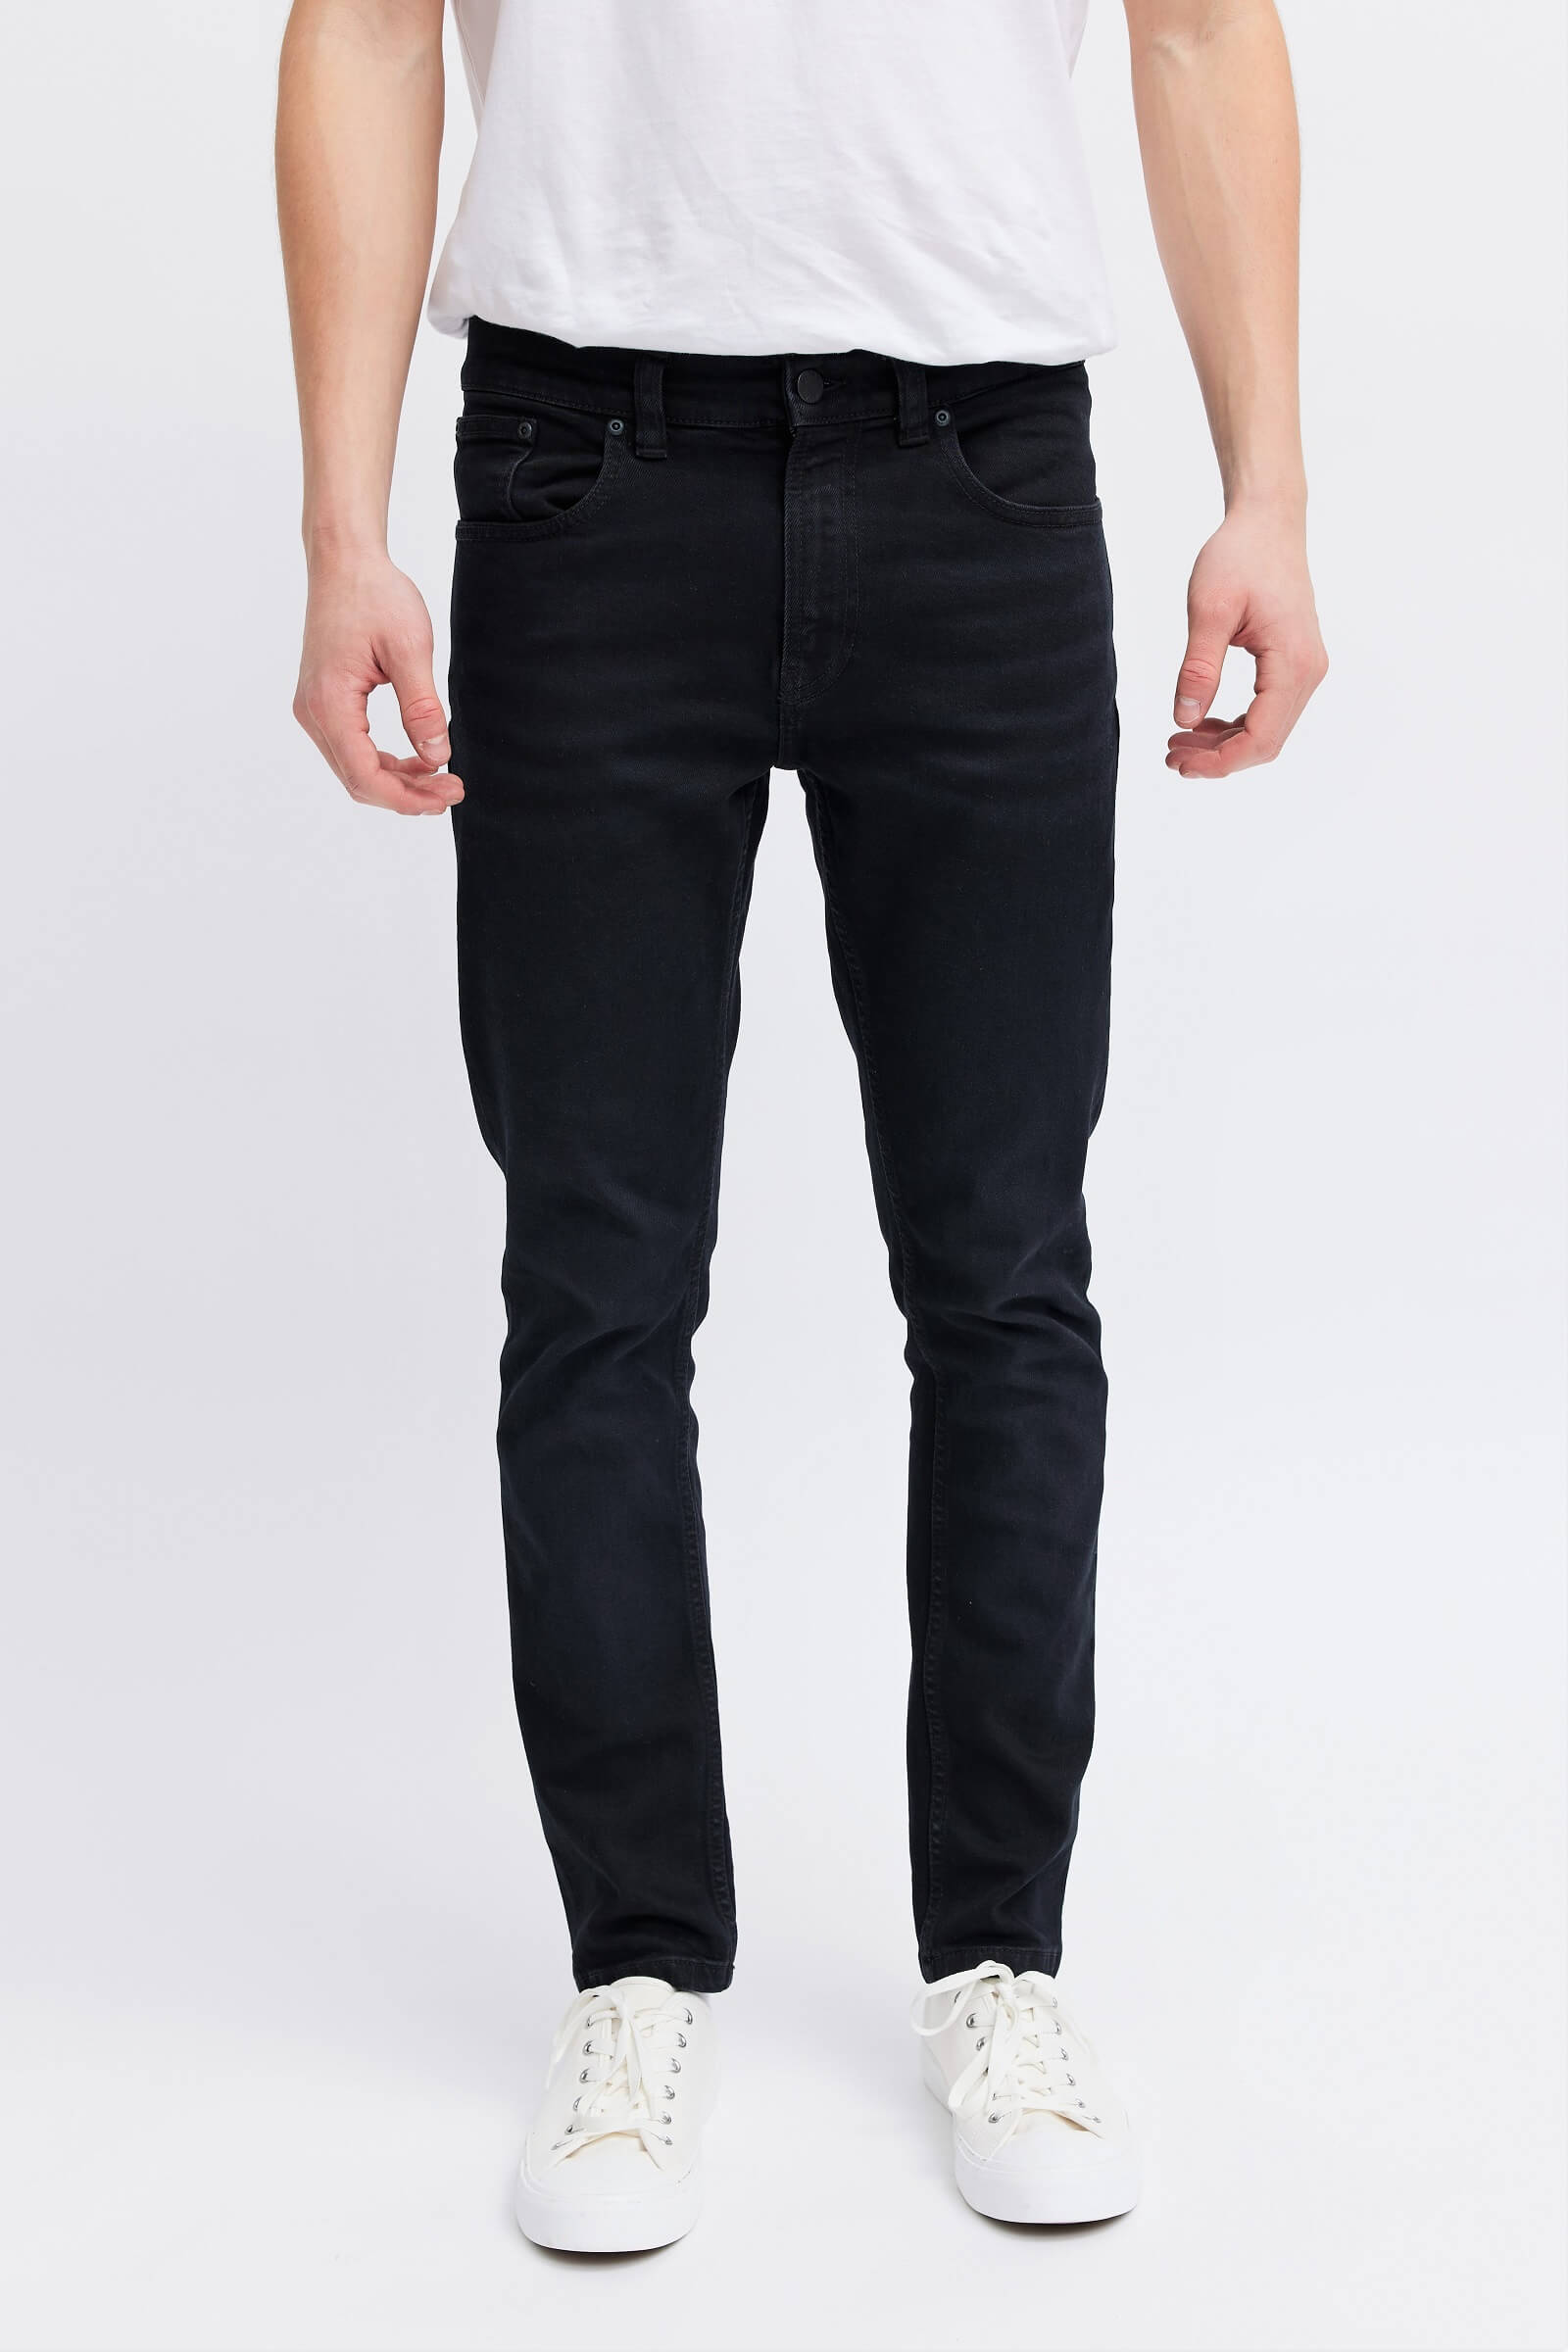 Jeans | 360° Organic Cotton | Men's Denim Made for Comfort & Style ...